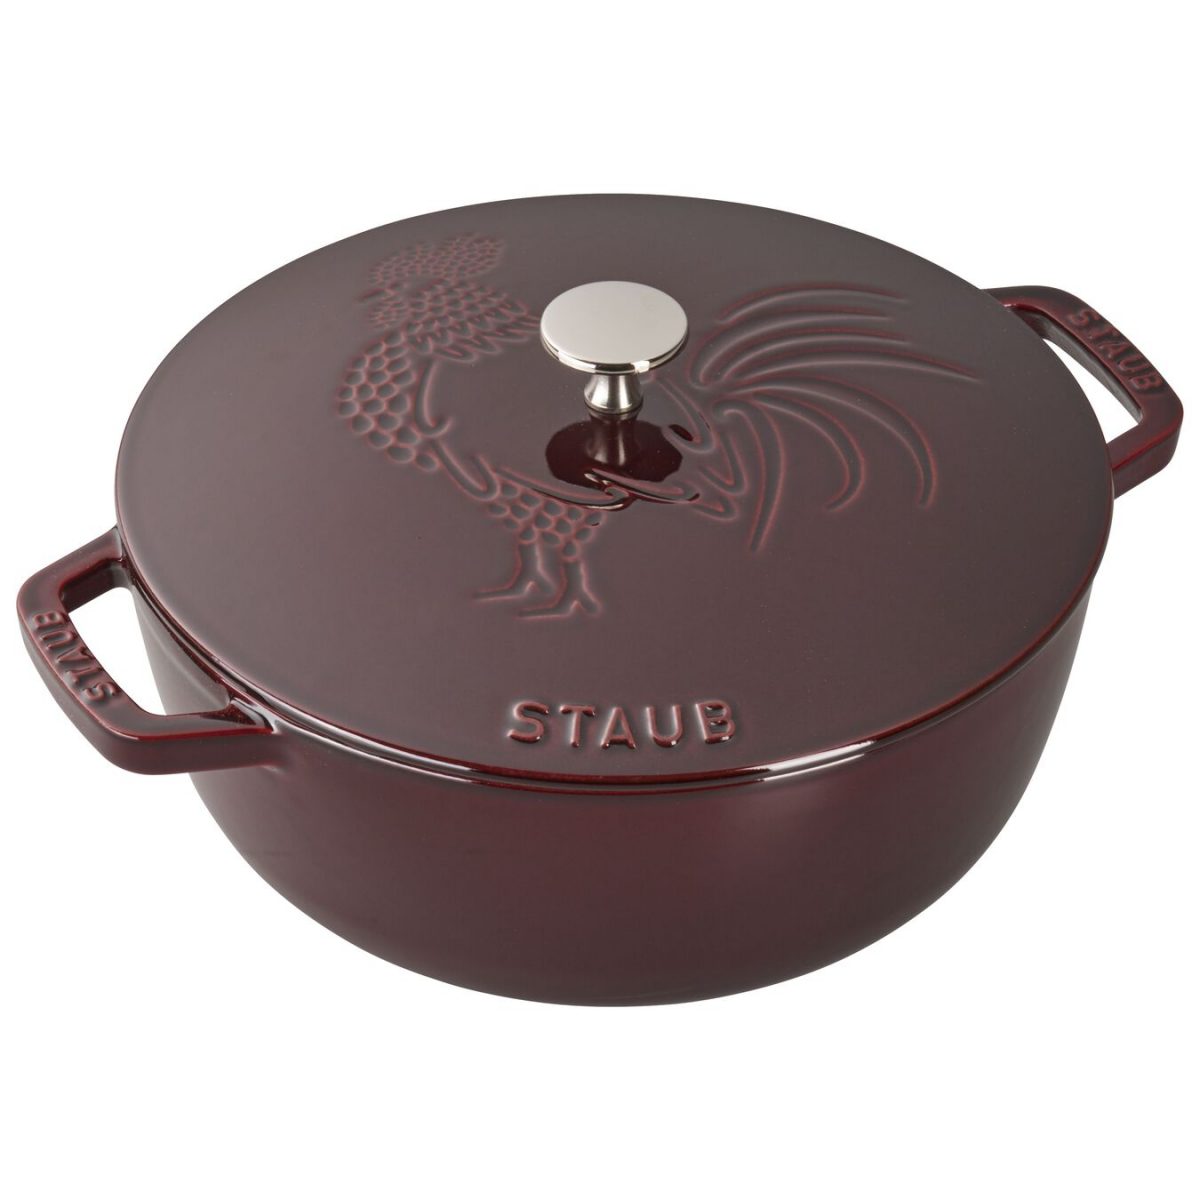 Staub Cast Iron Rooster Cocotte 24 cm 8